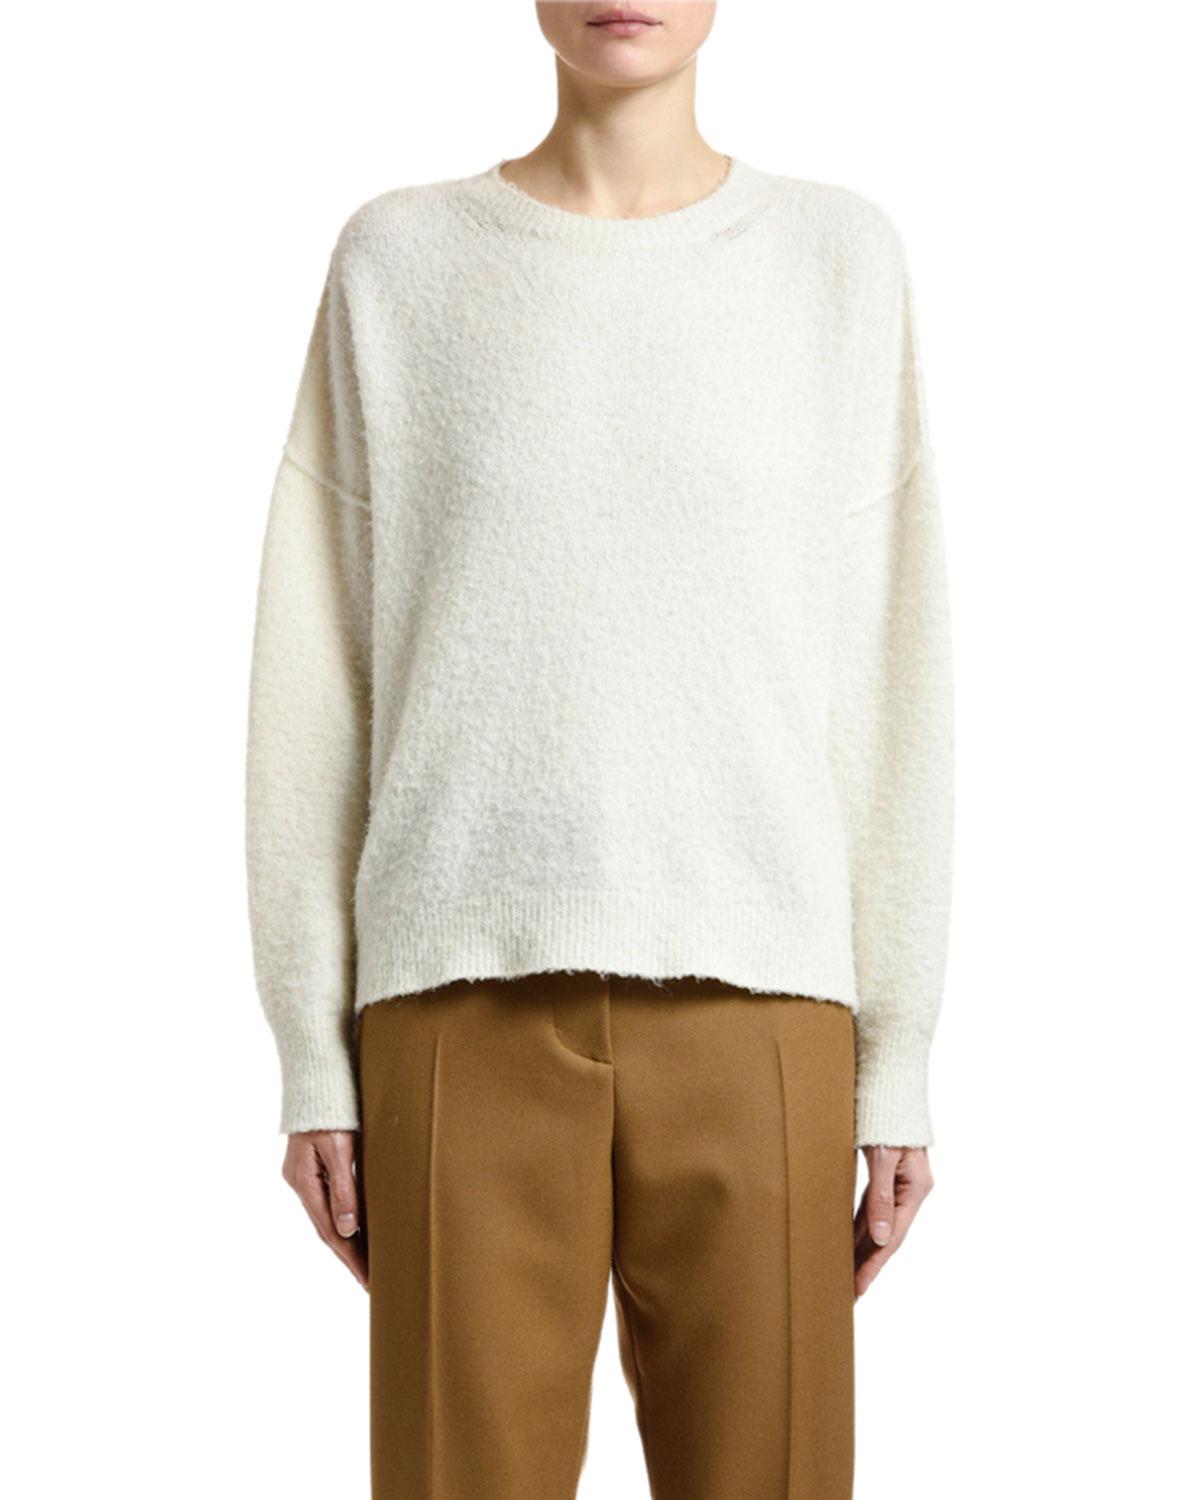 Marni Fuzzy Knit Oversized Crewneck Sweater in White - Lyst